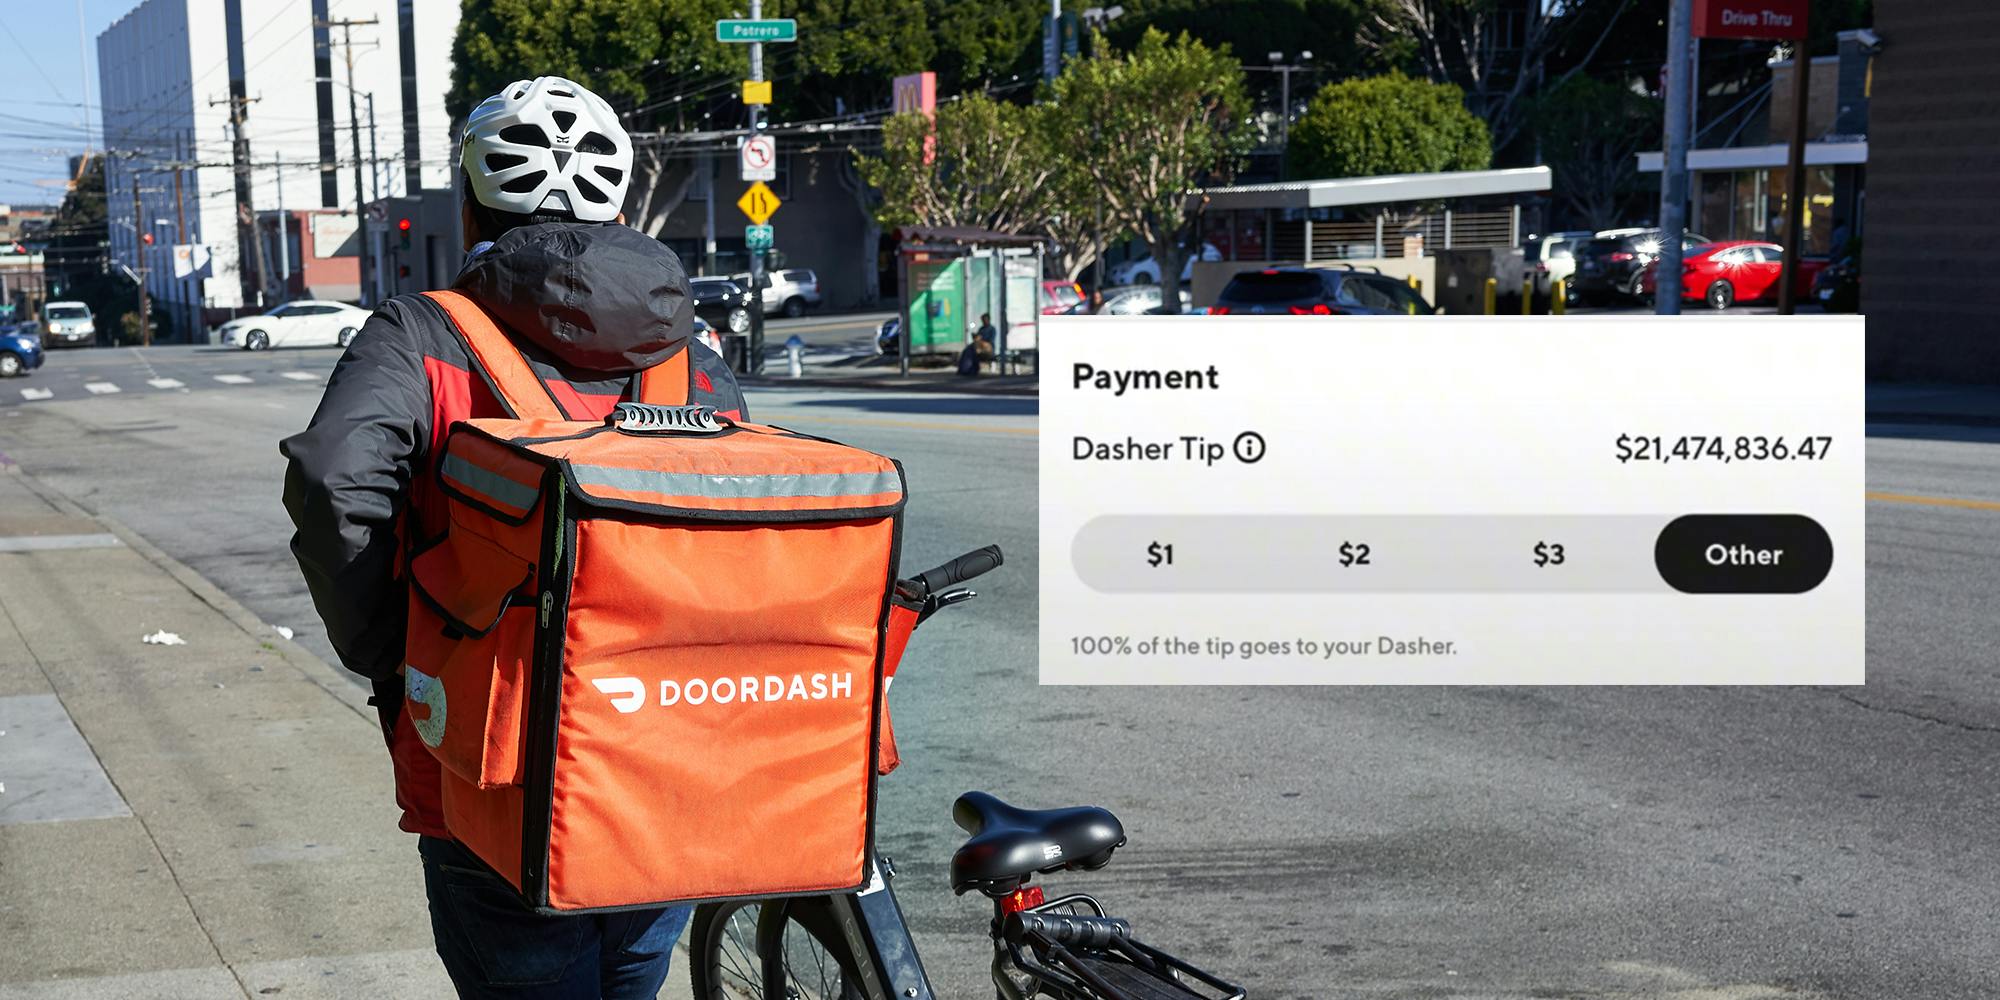 Customer Claims They Tipped Big During DoorDash Glitch